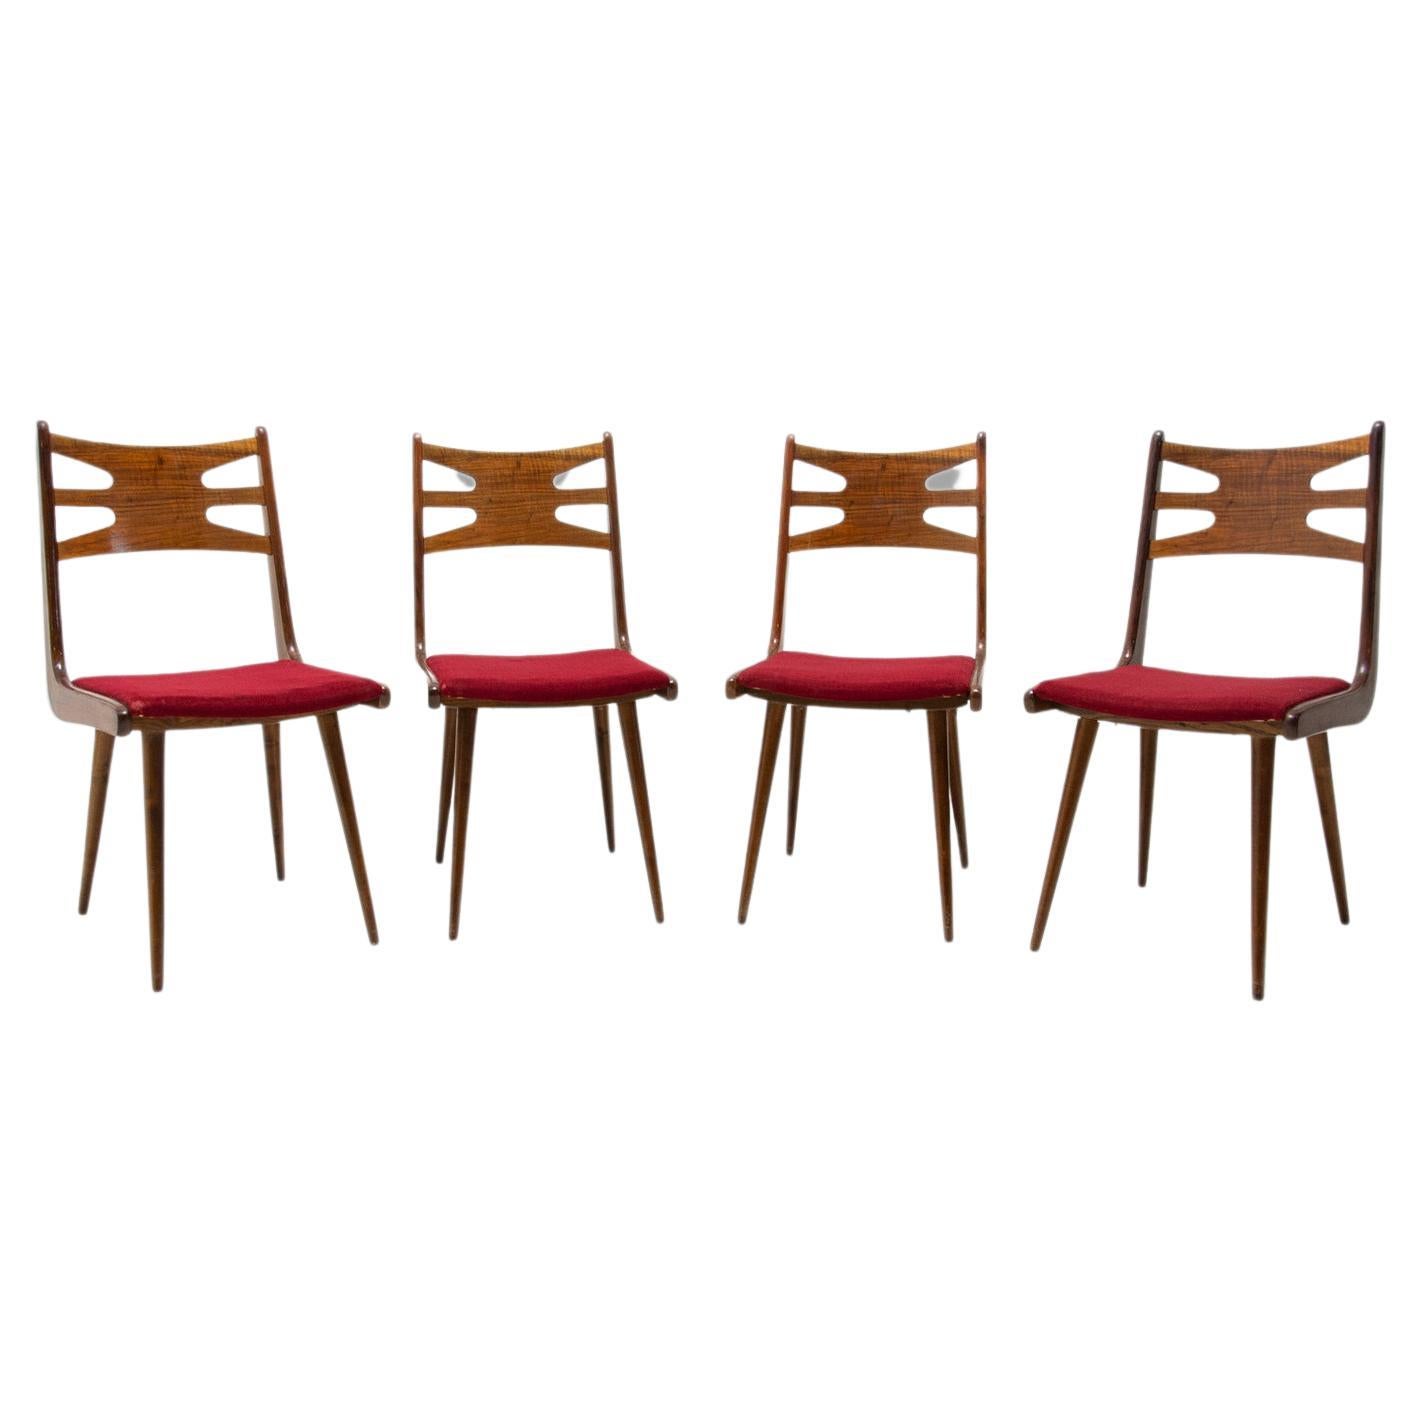 Set of Upholstered Walnut Dining Chairs, 1970s, Czechoslovakia For Sale